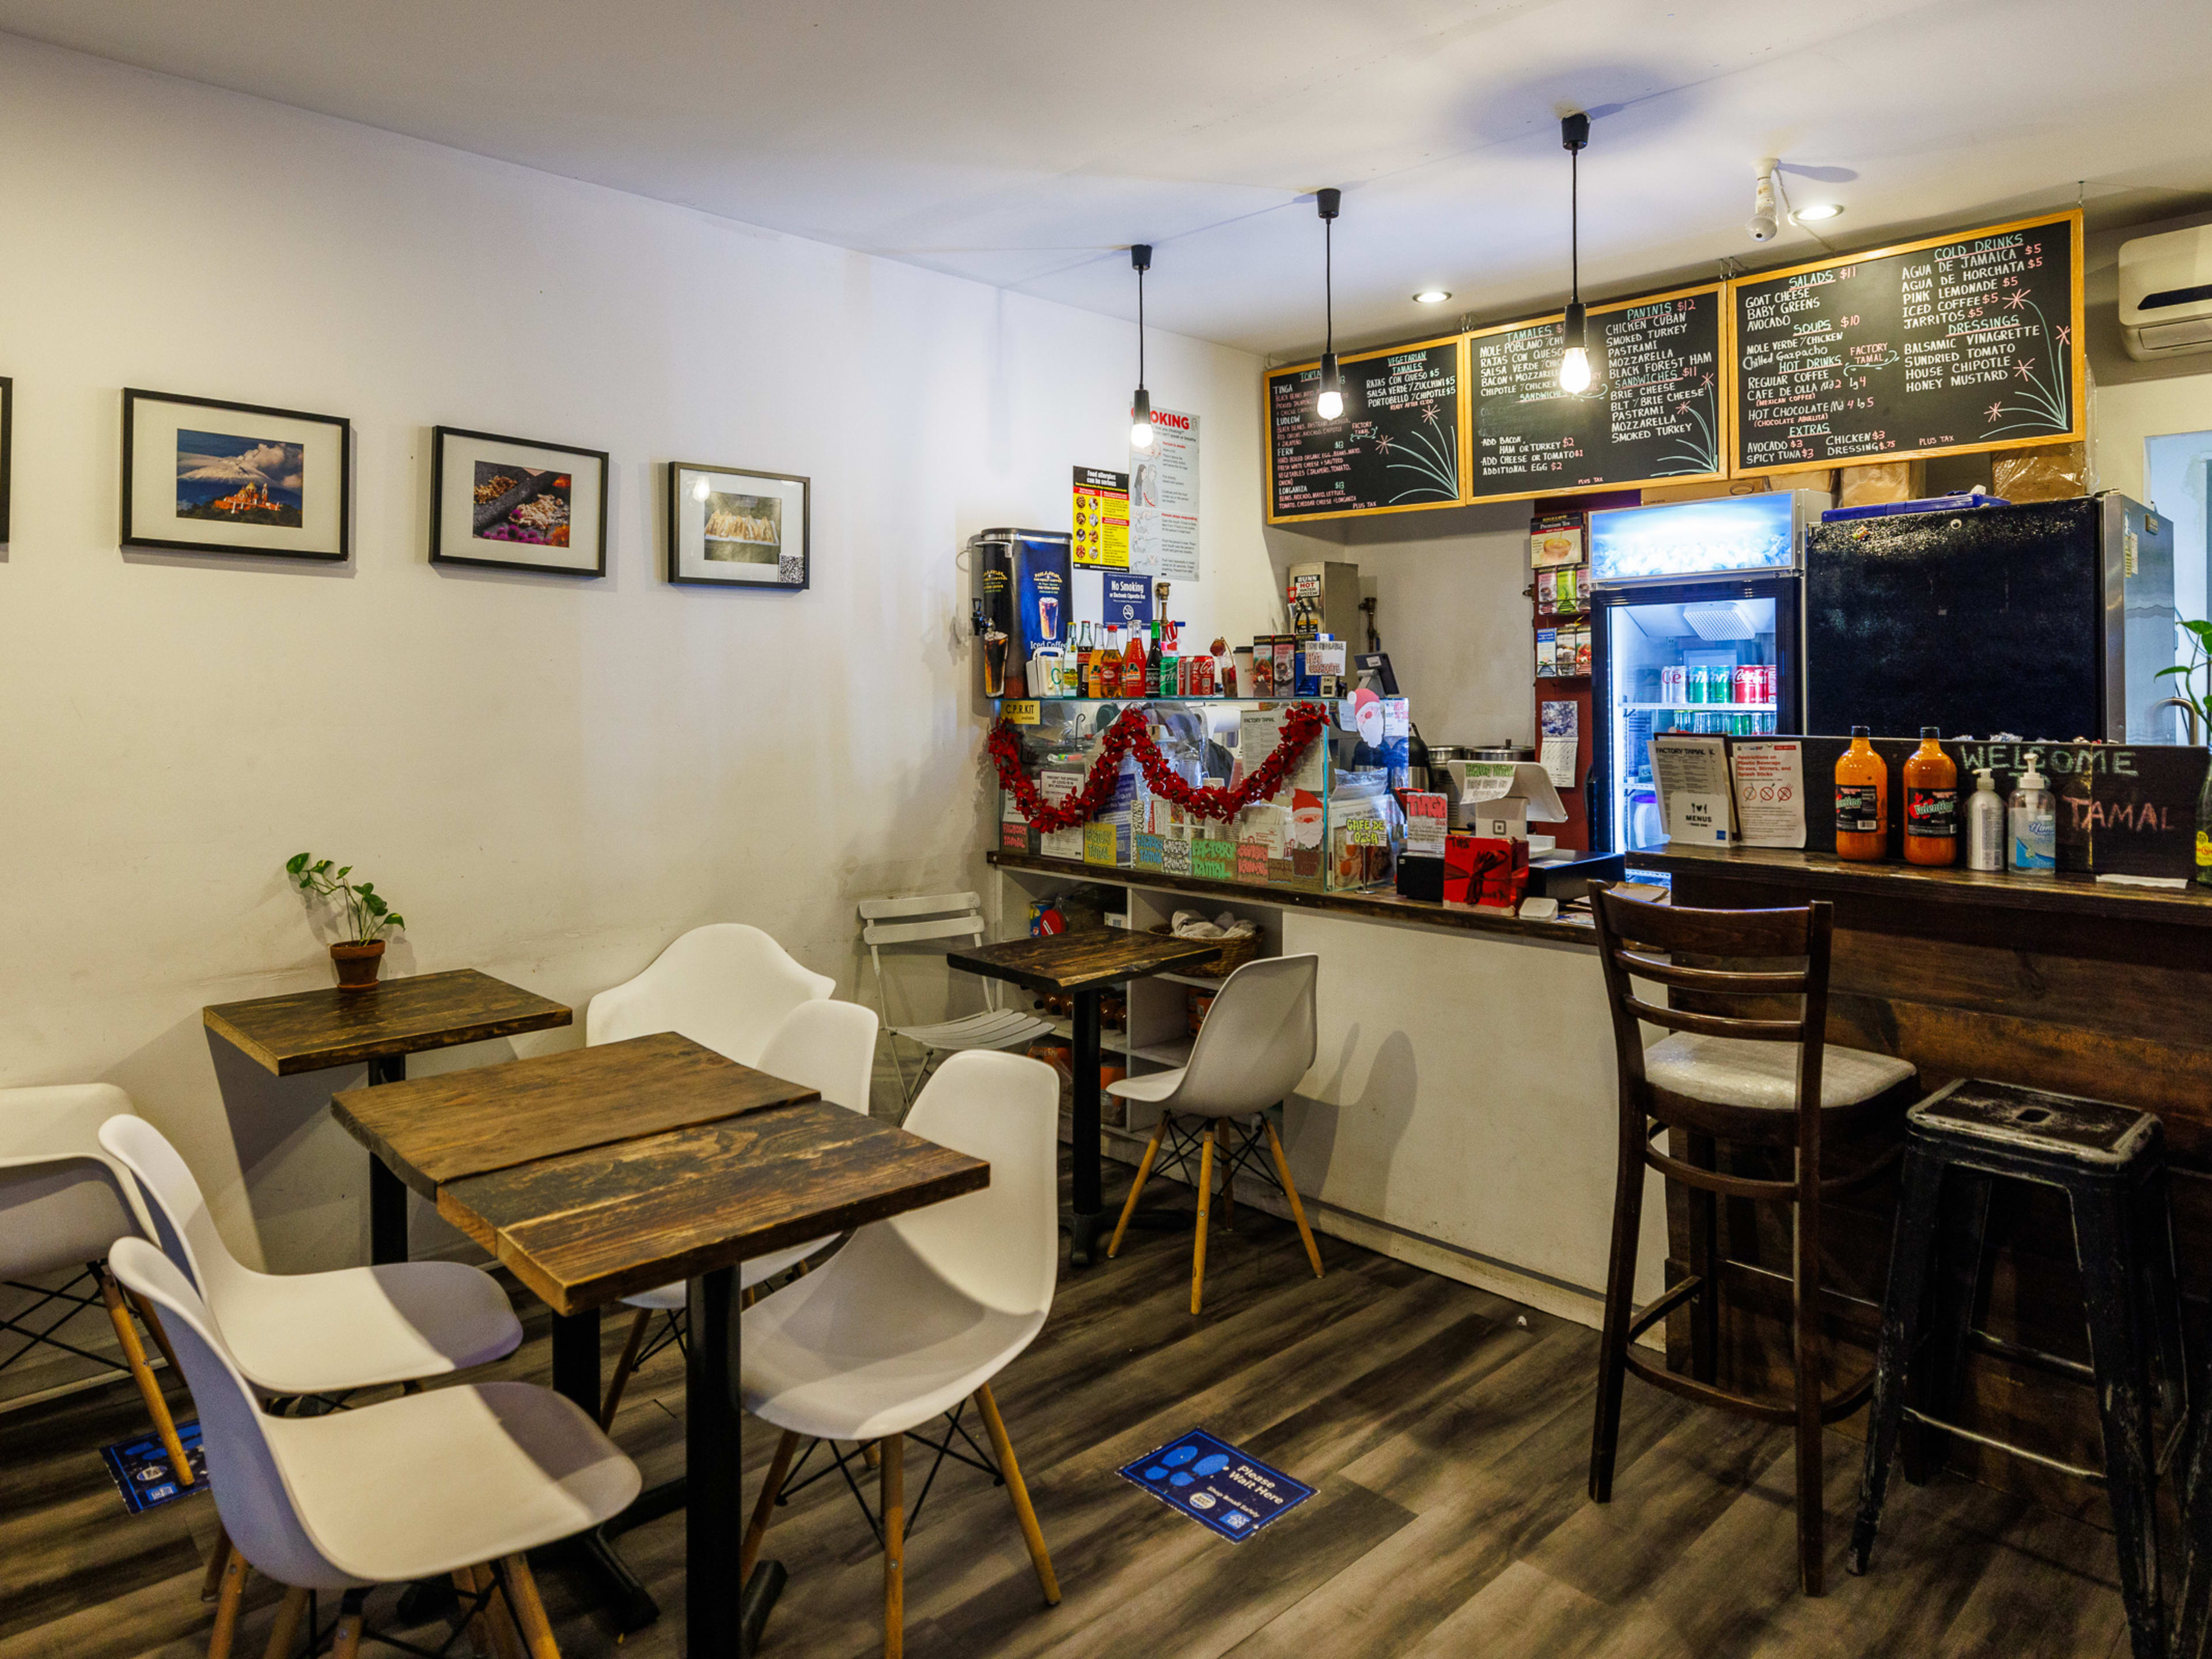 Factory Tamal interiors with square wooden tables and white chairs and chalkboard menus hanging behind the counter